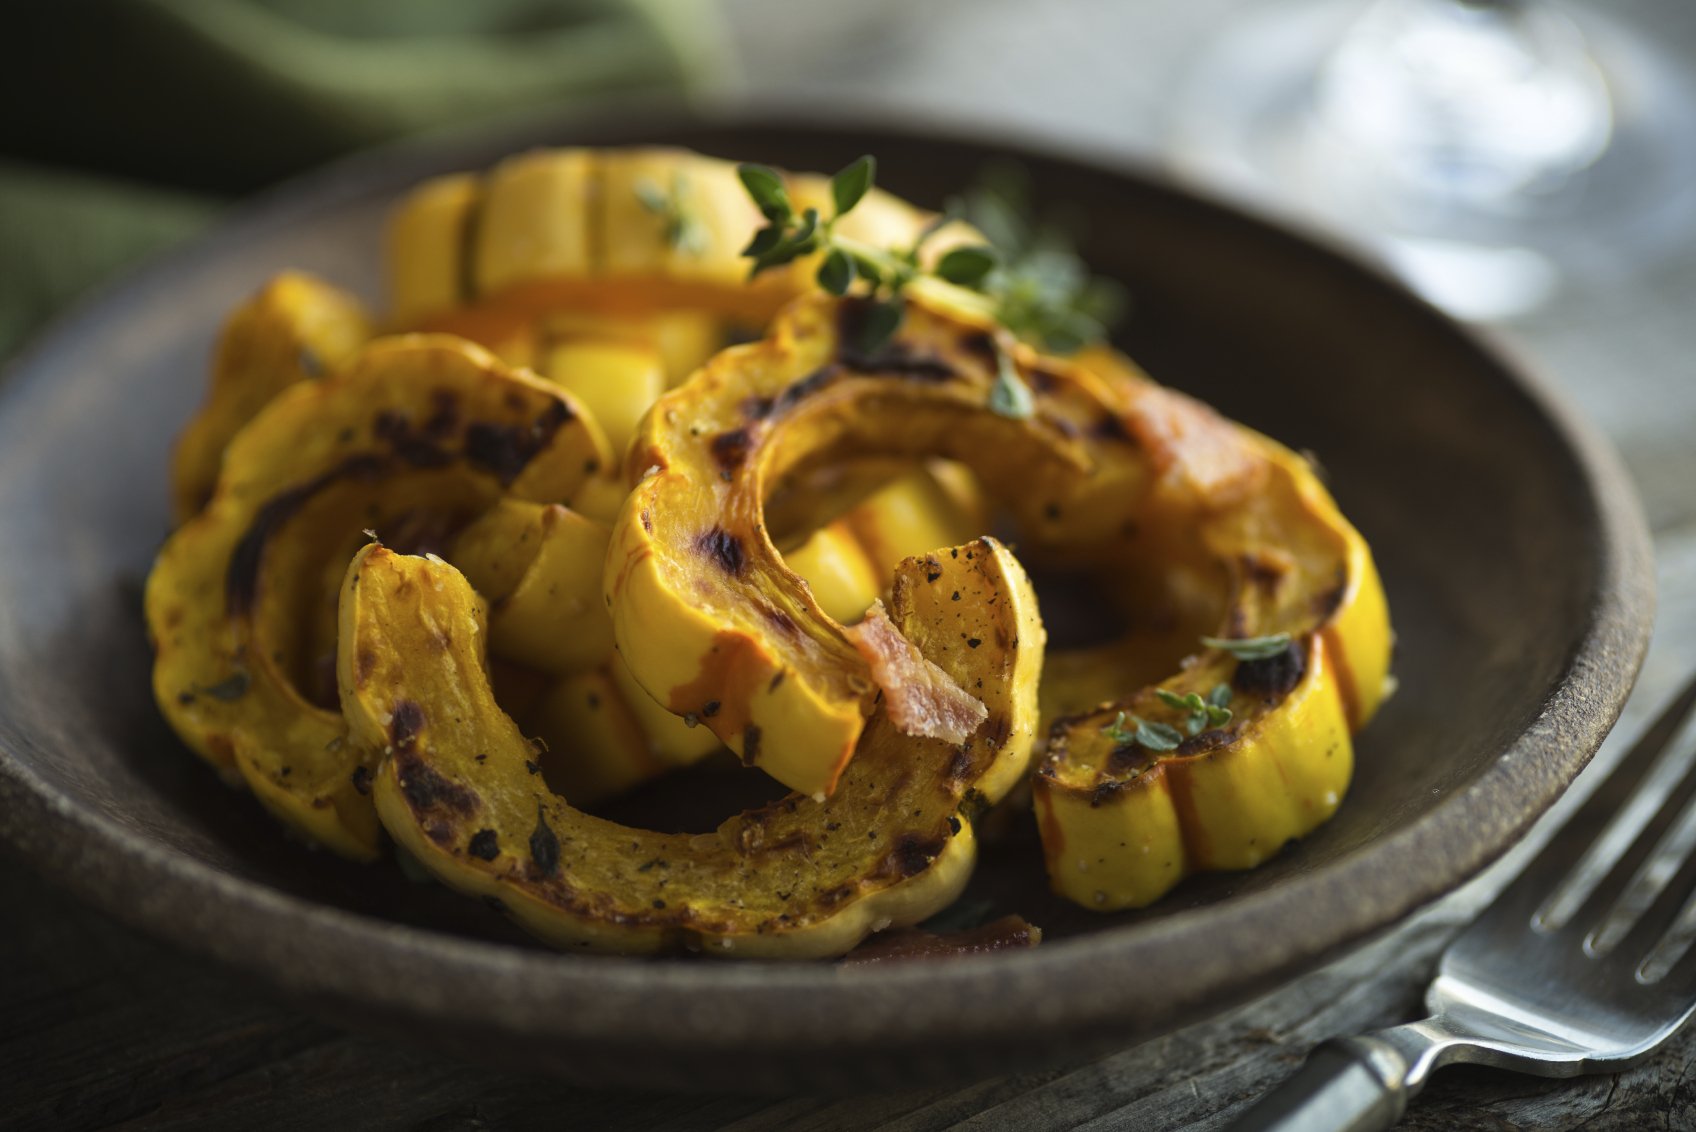 Plate with freshly roasted delicata squash and herbs